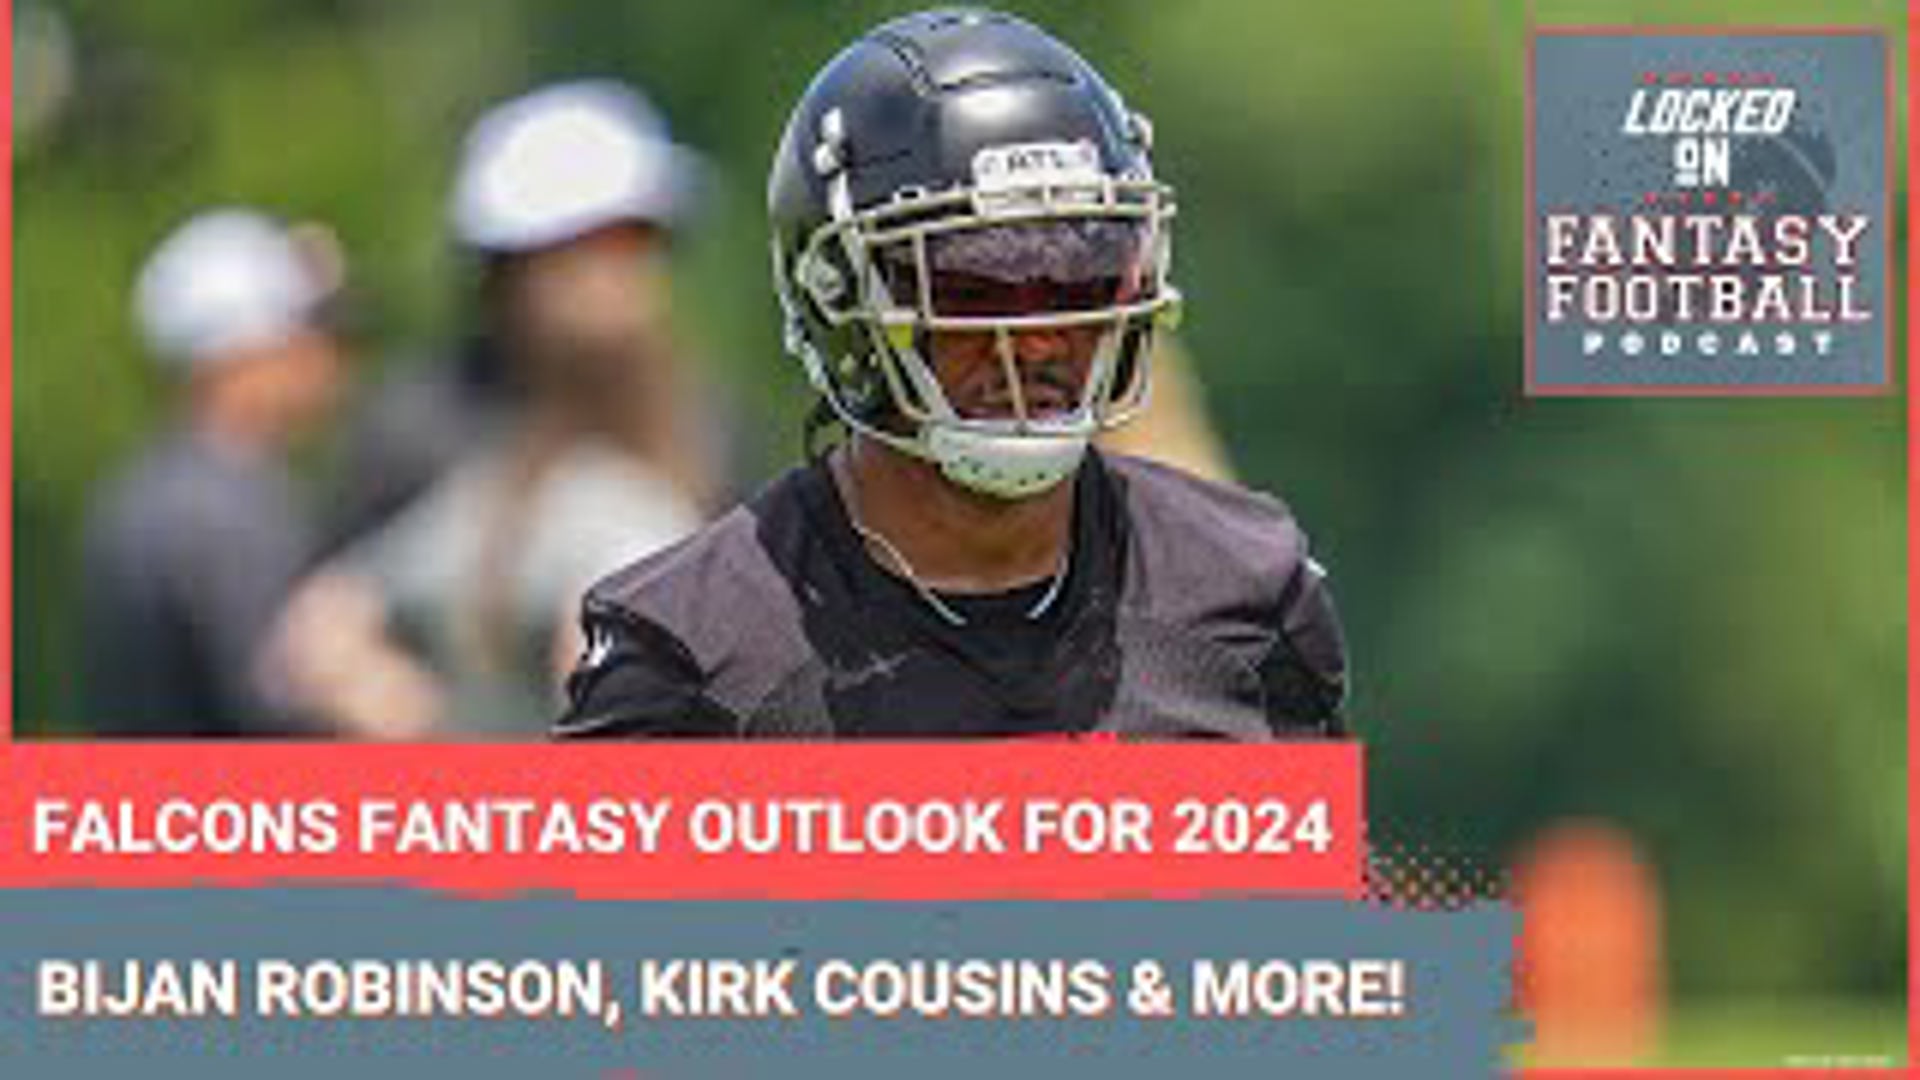 Sporting News.com's Vinnie Iyer and NFL.com's Michelle Magdziuk break down the fantasy football potential of the 2024 Atlanta Falcons.